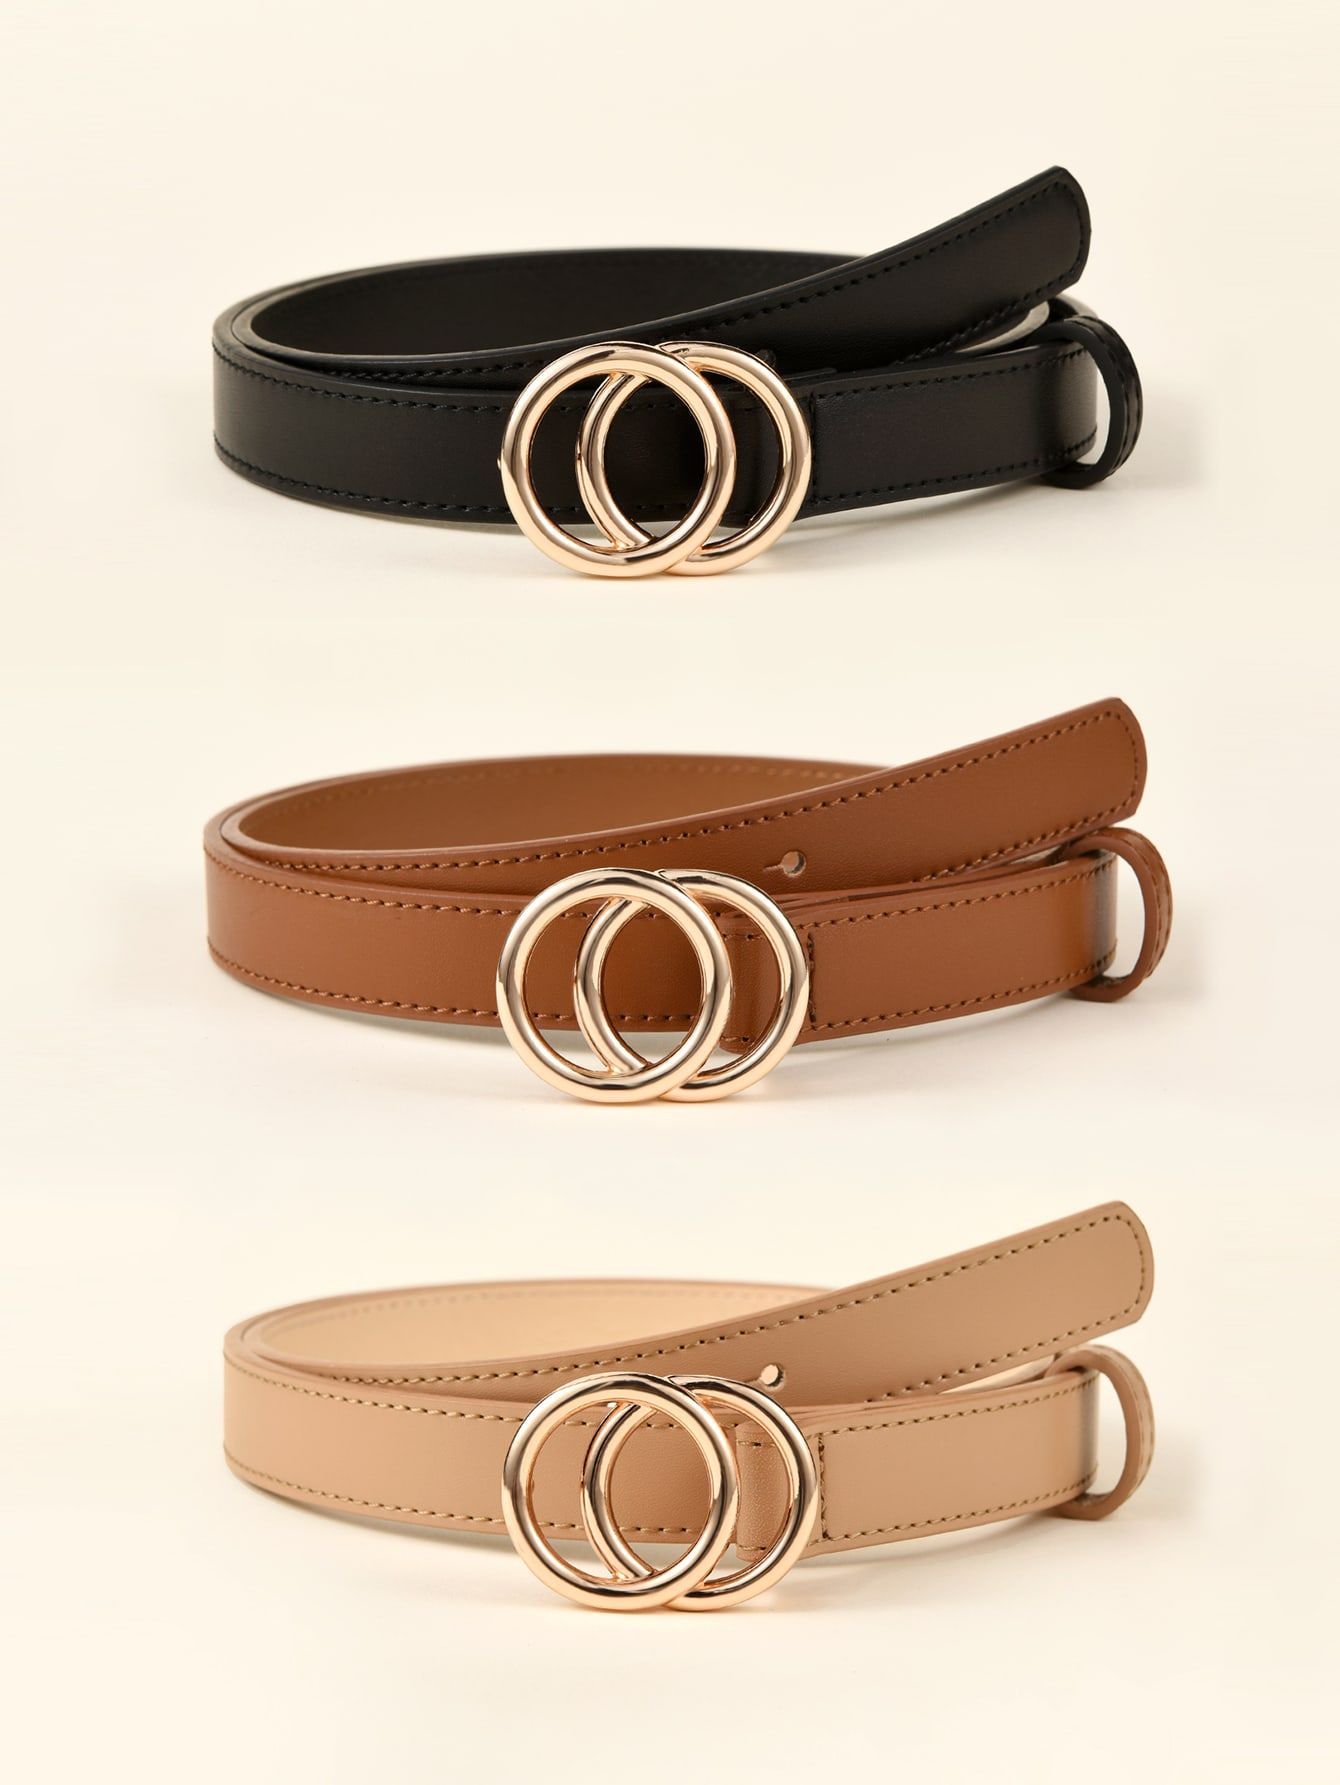 Fancy Belts: Statement-Making Accessories to Elevate Your Outfit